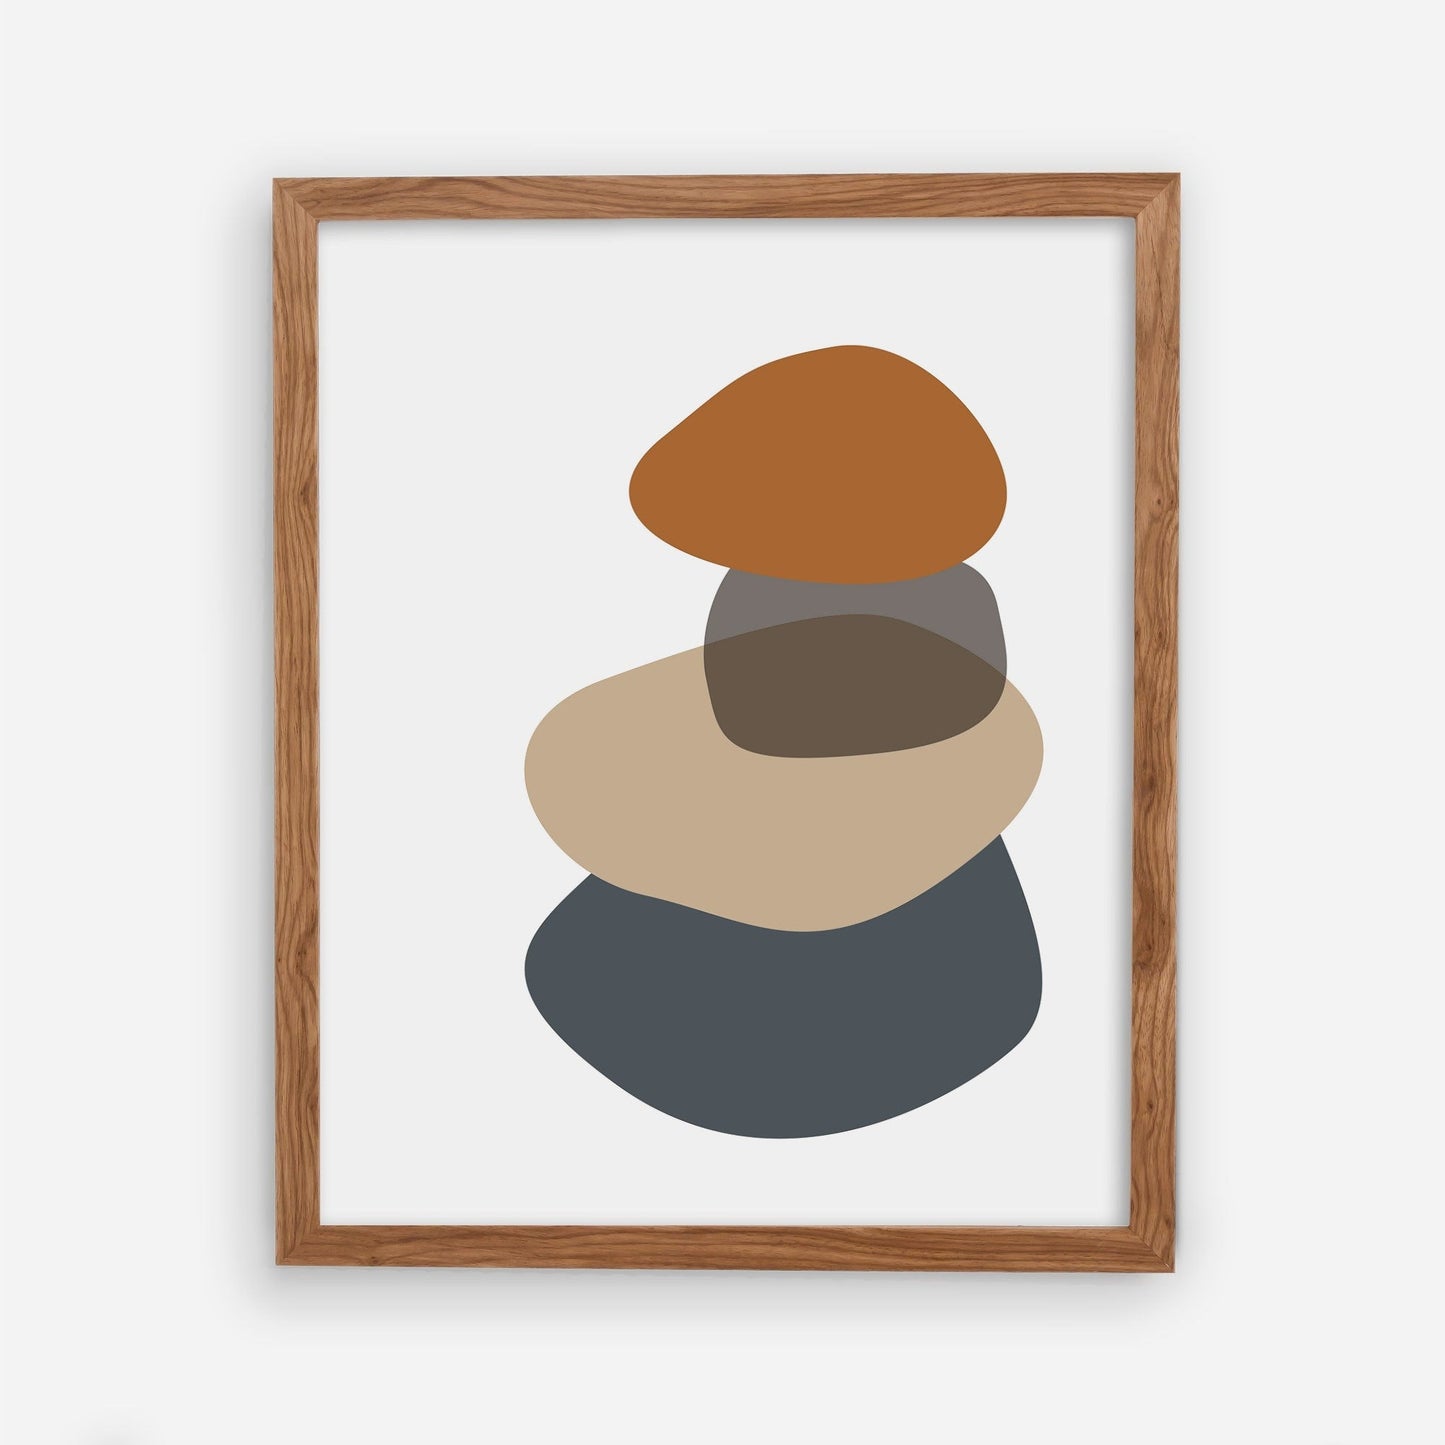 Mid-Century Modern Abstract Wall Art - Oversized Art - Caramel Brown Terracotta Gray Beige - Change Colors Available